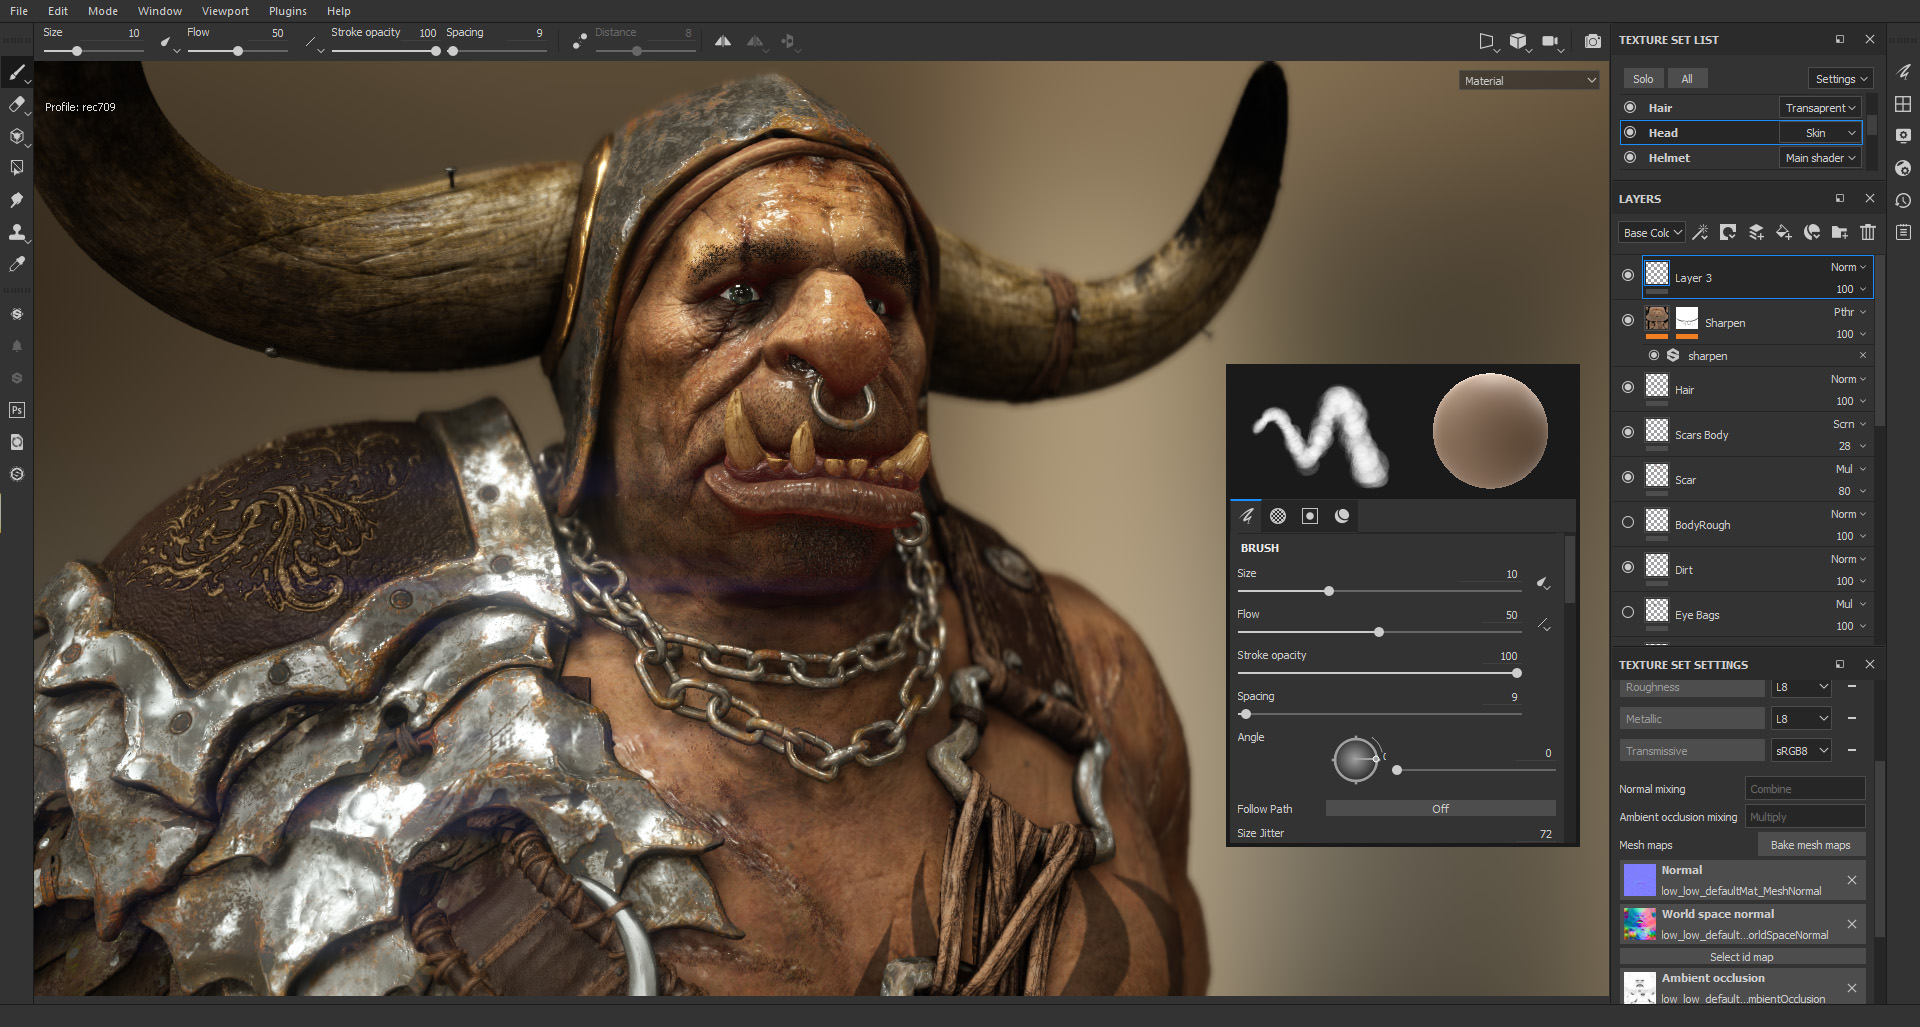 download the new version for ios Adobe Substance Painter 2023 v9.1.0.2983